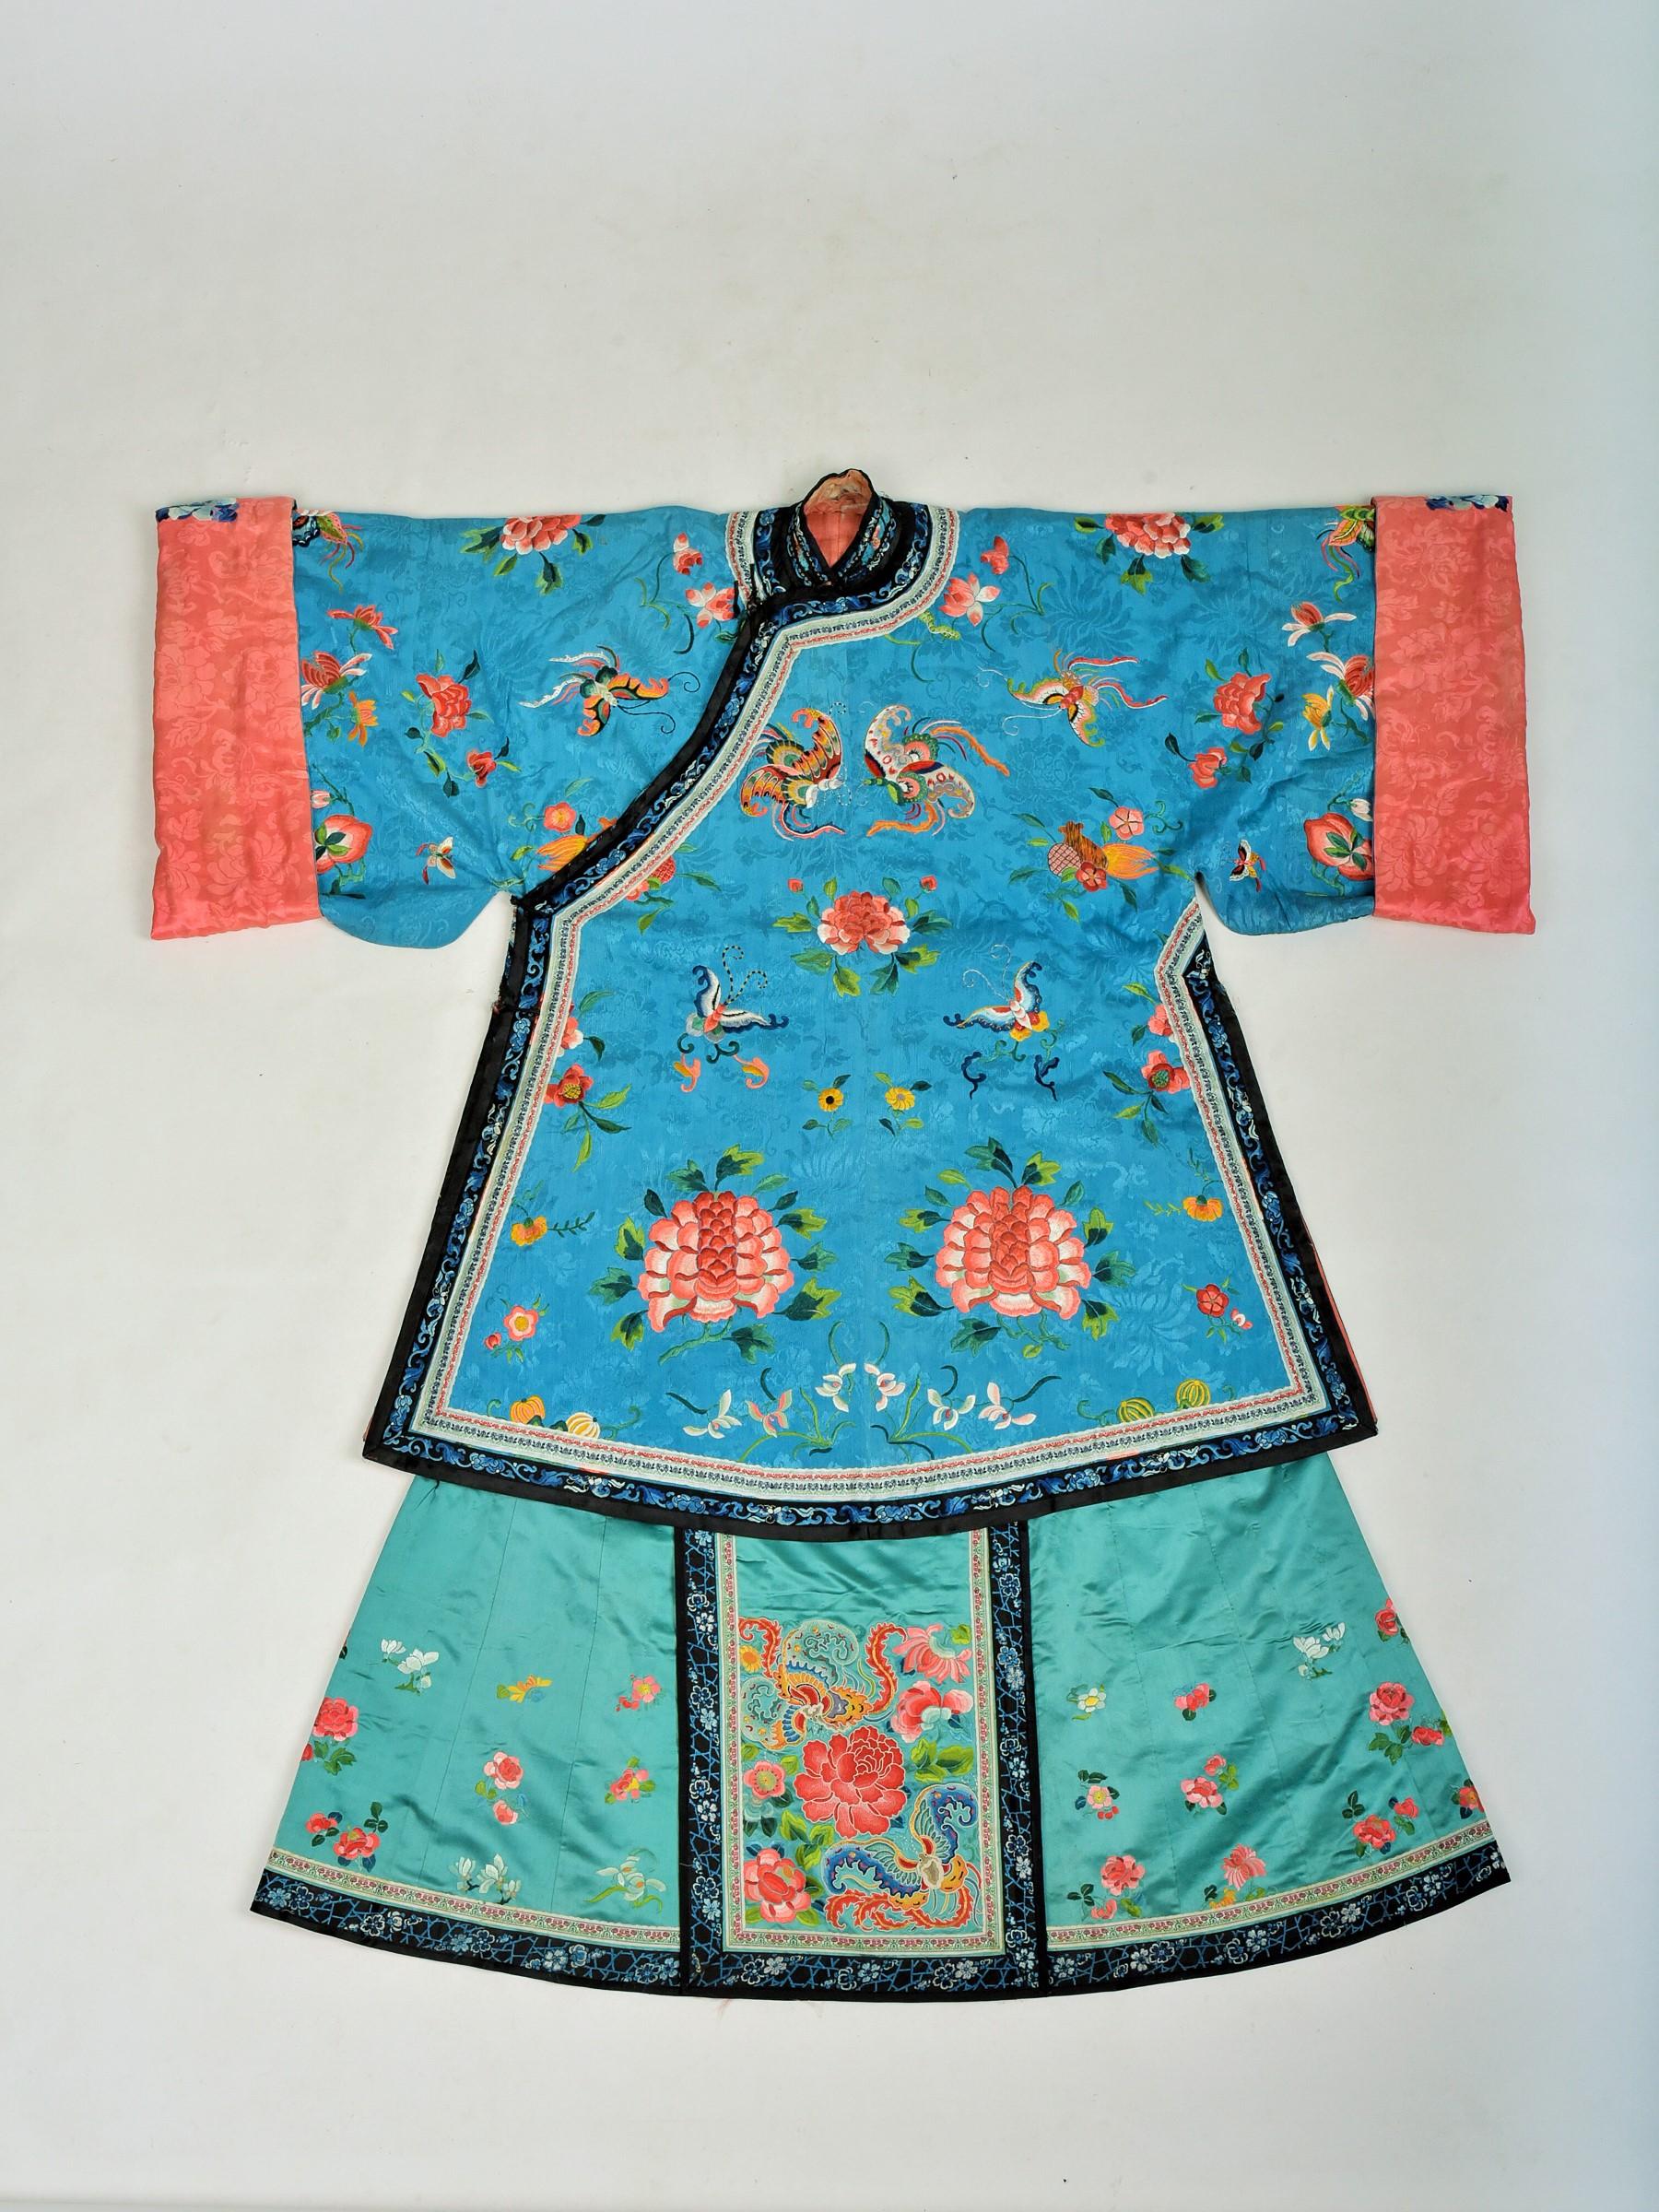 Women's or Men's Semi Formal Silk Embroidered Manchu Woman's Skirt and Dress Qing period C.1900